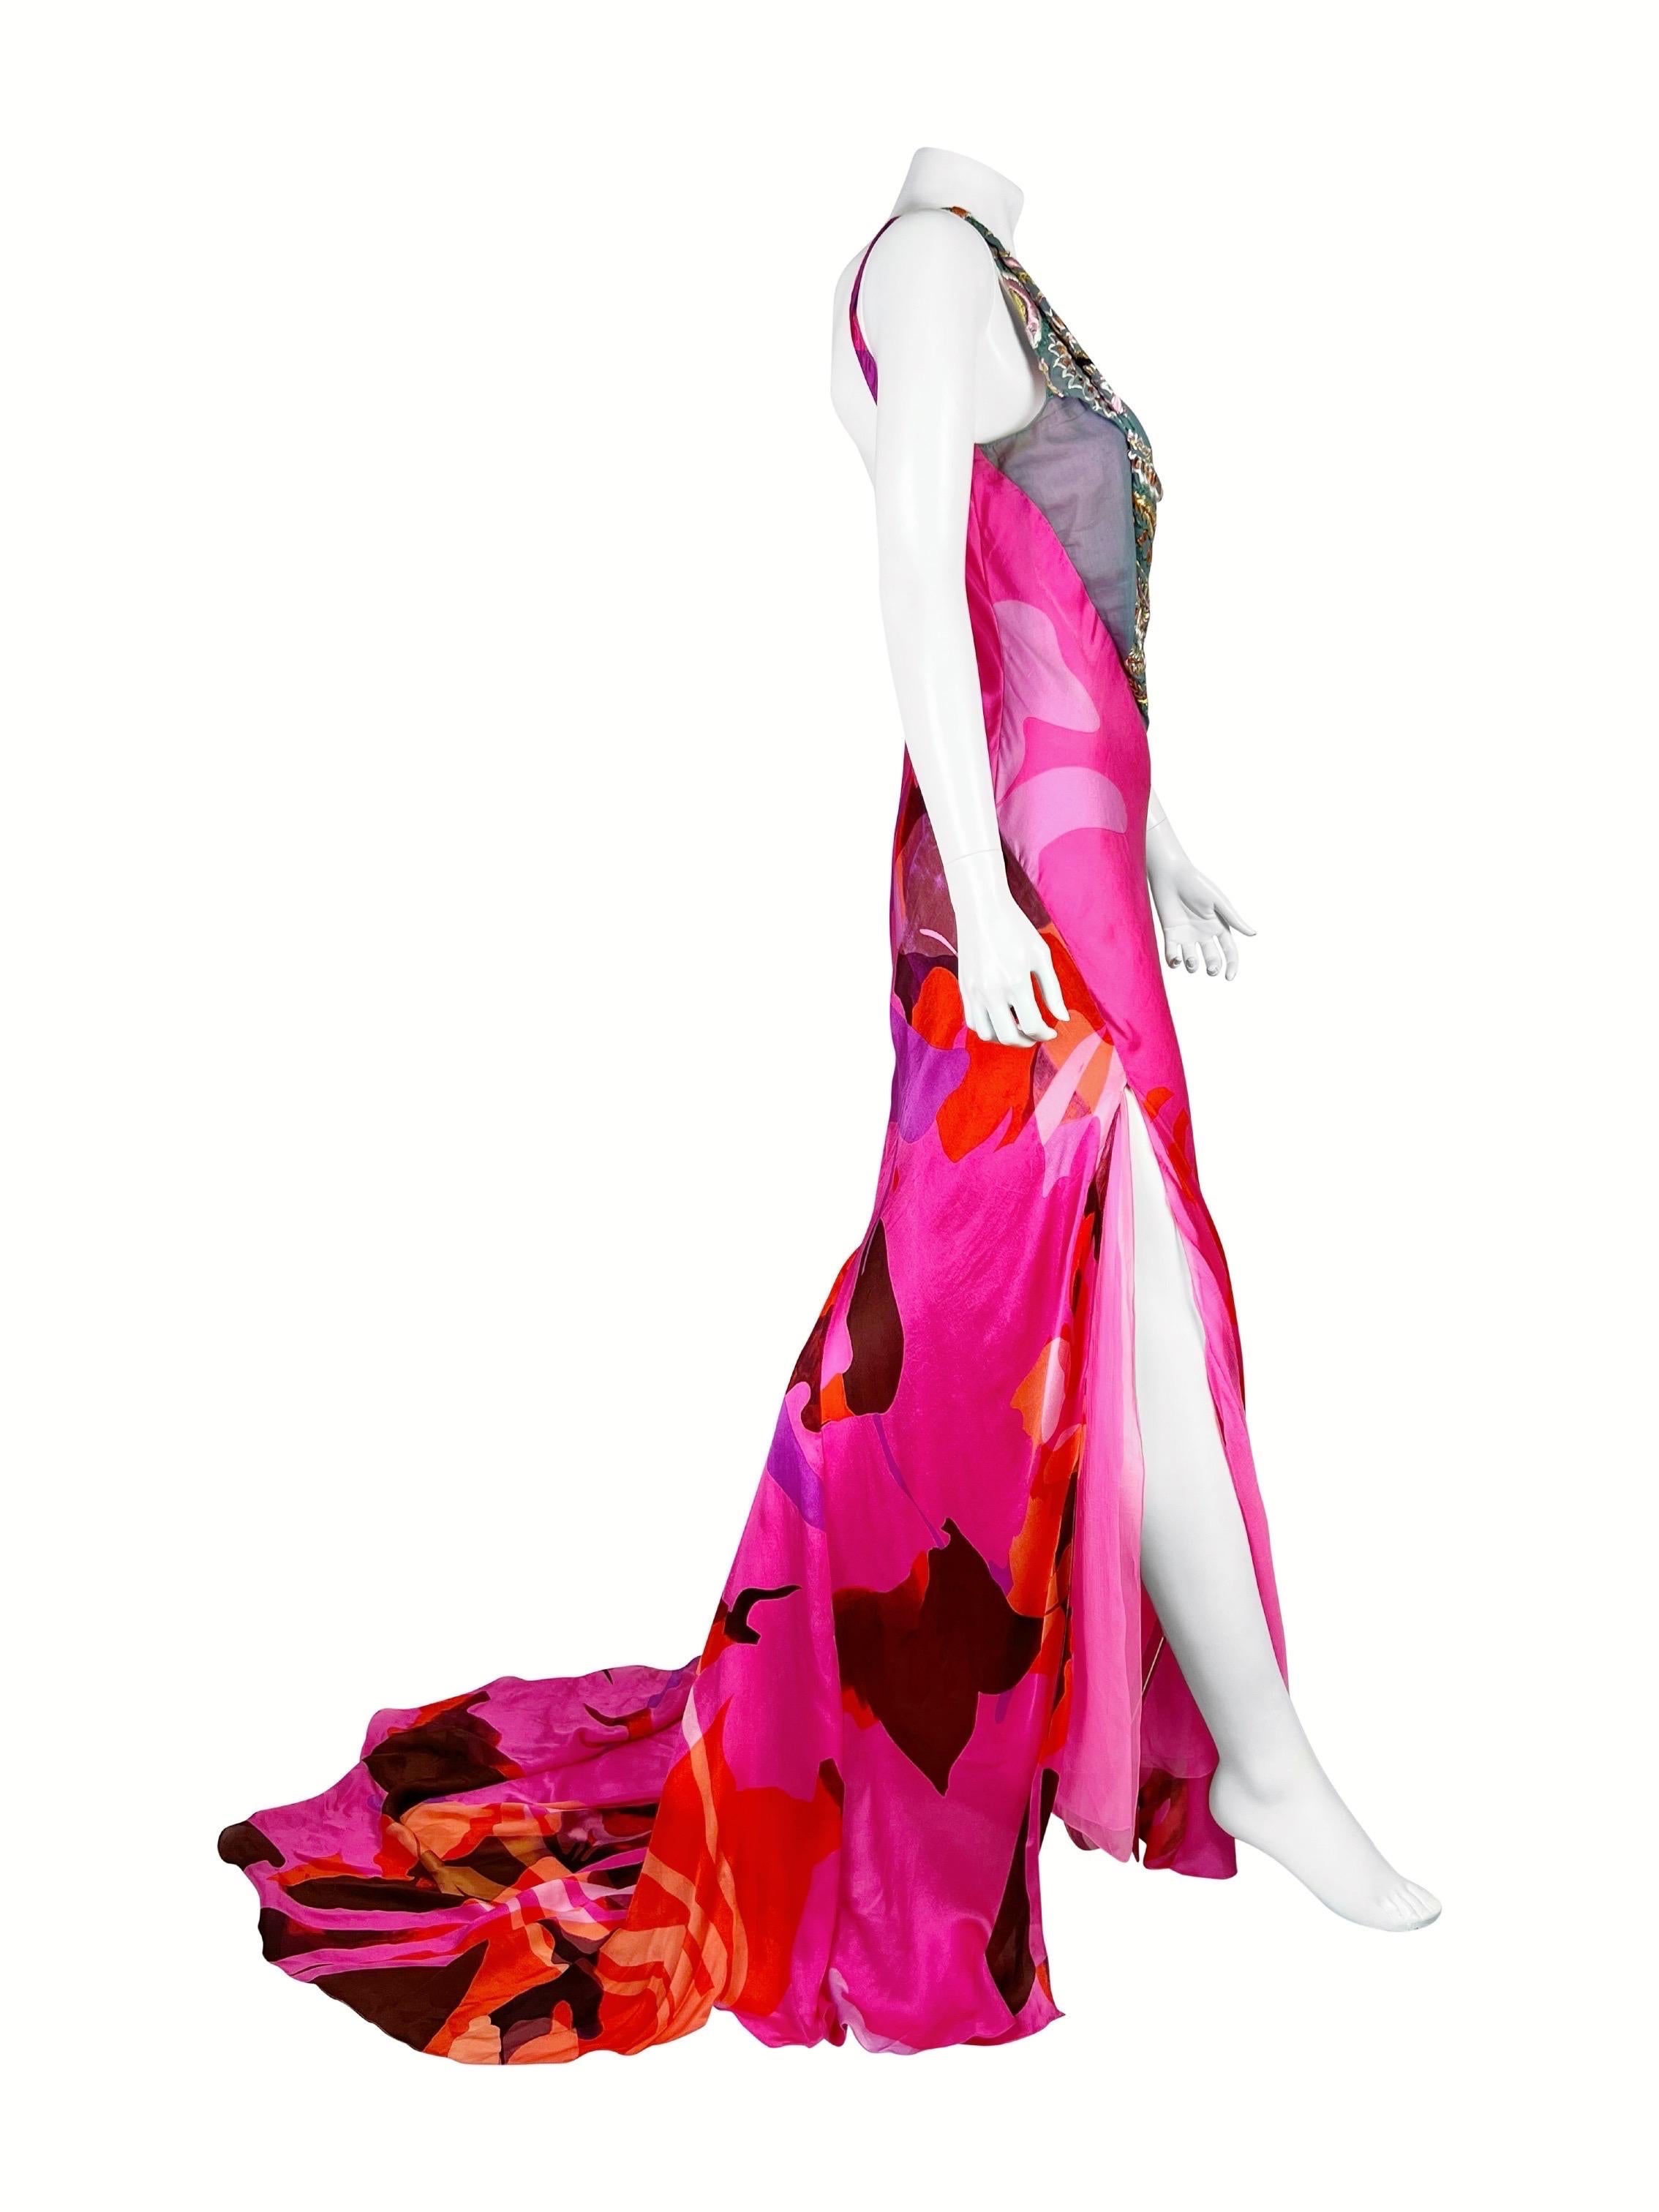 Women's SS 2003 Christian Lacroix RTW Silk Gown For Sale